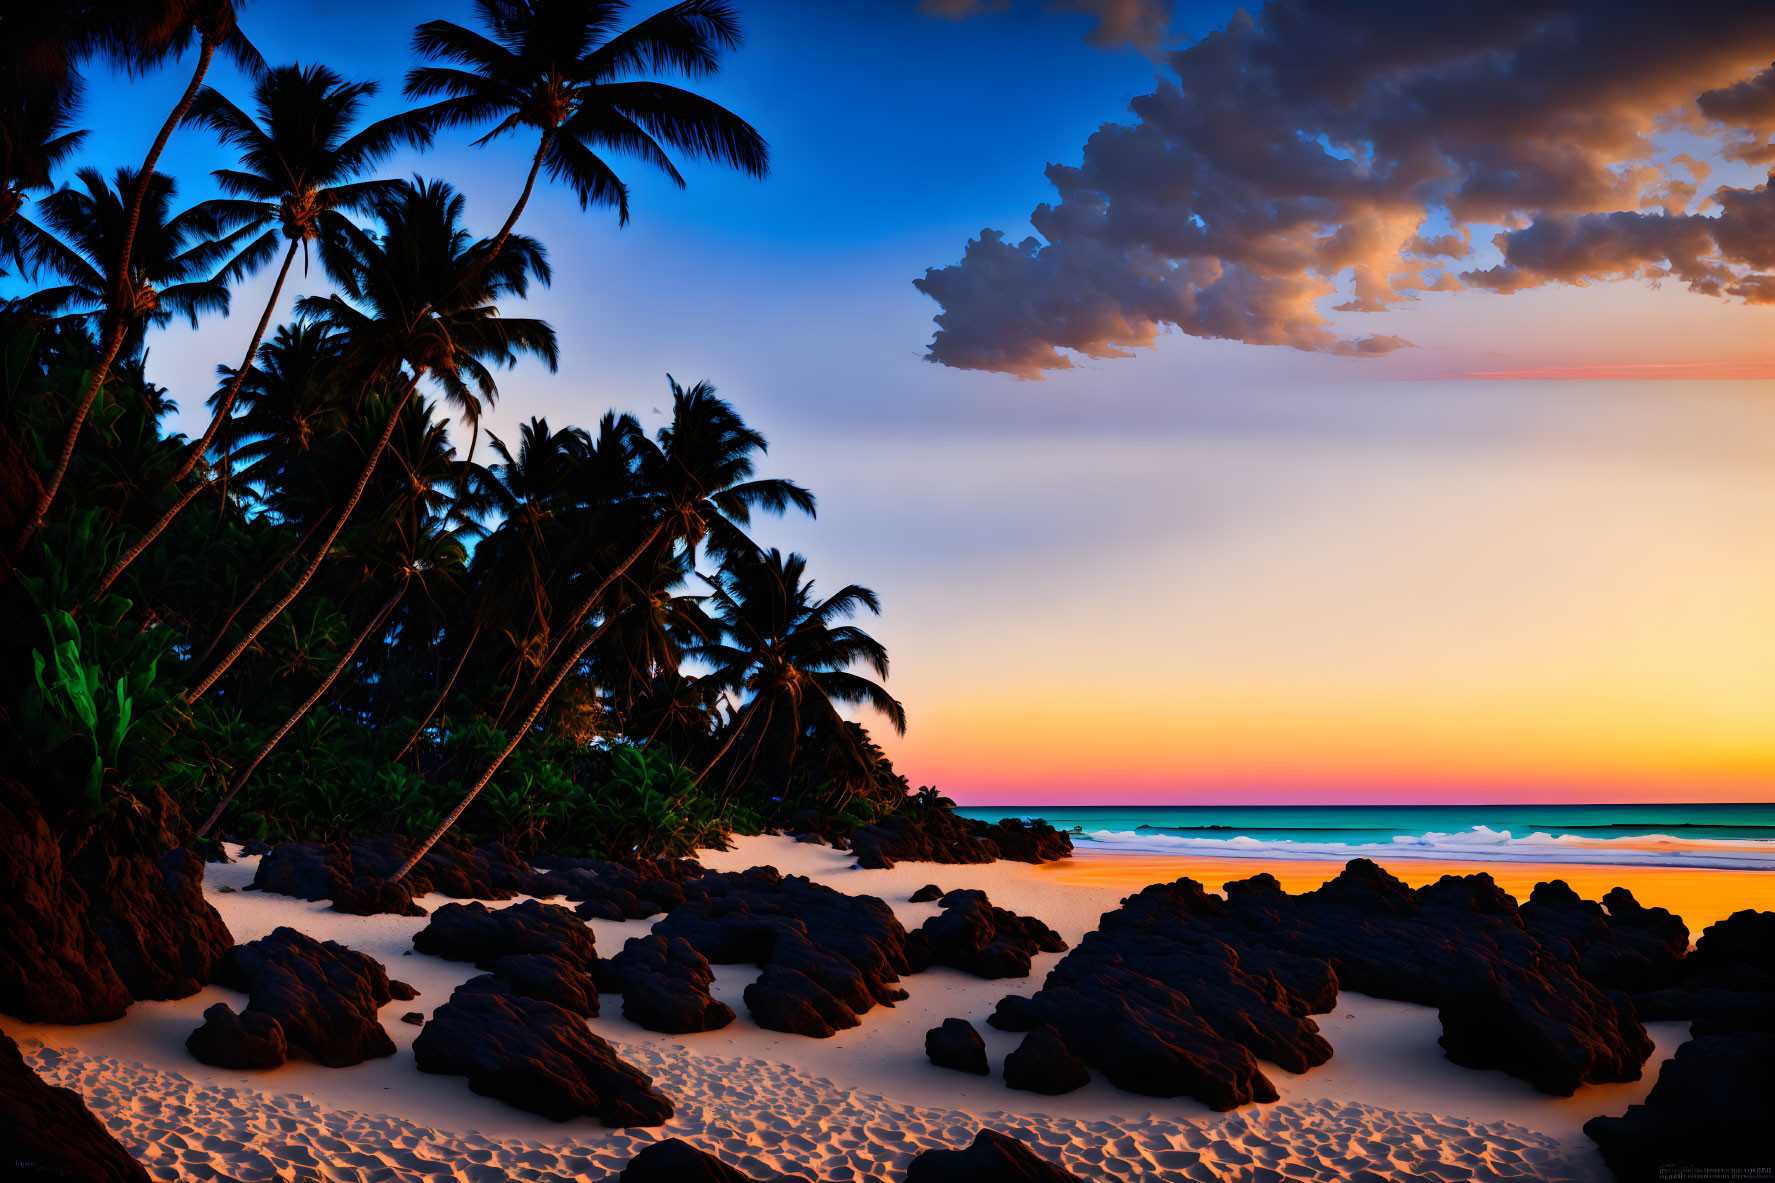 Scenic sunset tropical beach with palm trees and rocky shore